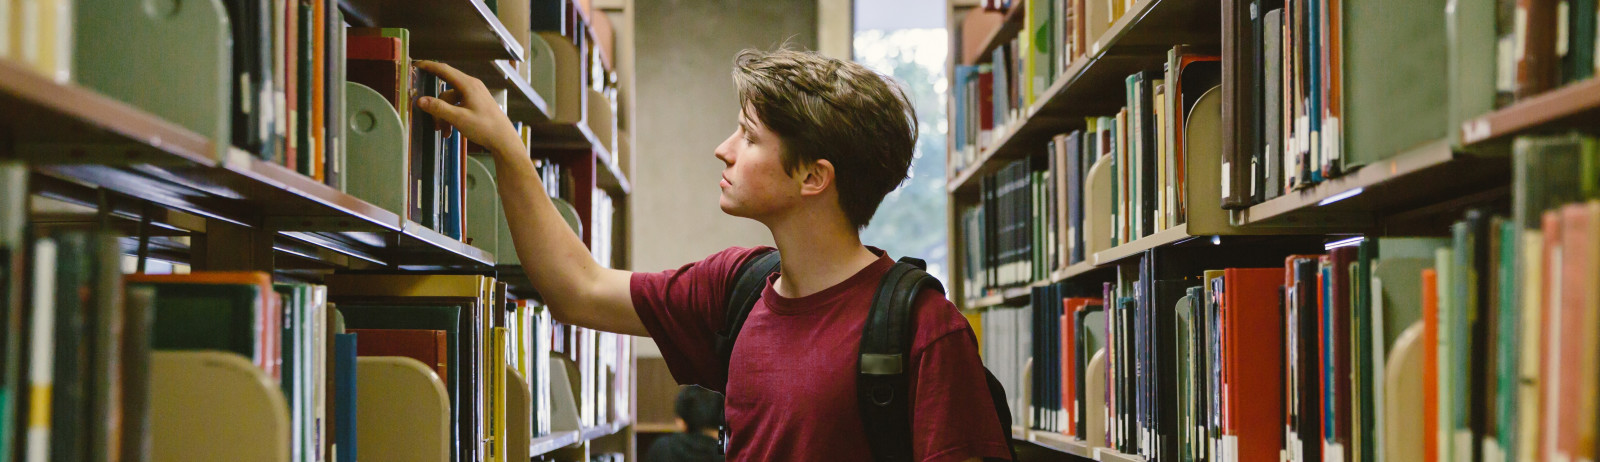 A male test taker looking at the book in a library bookshelf.